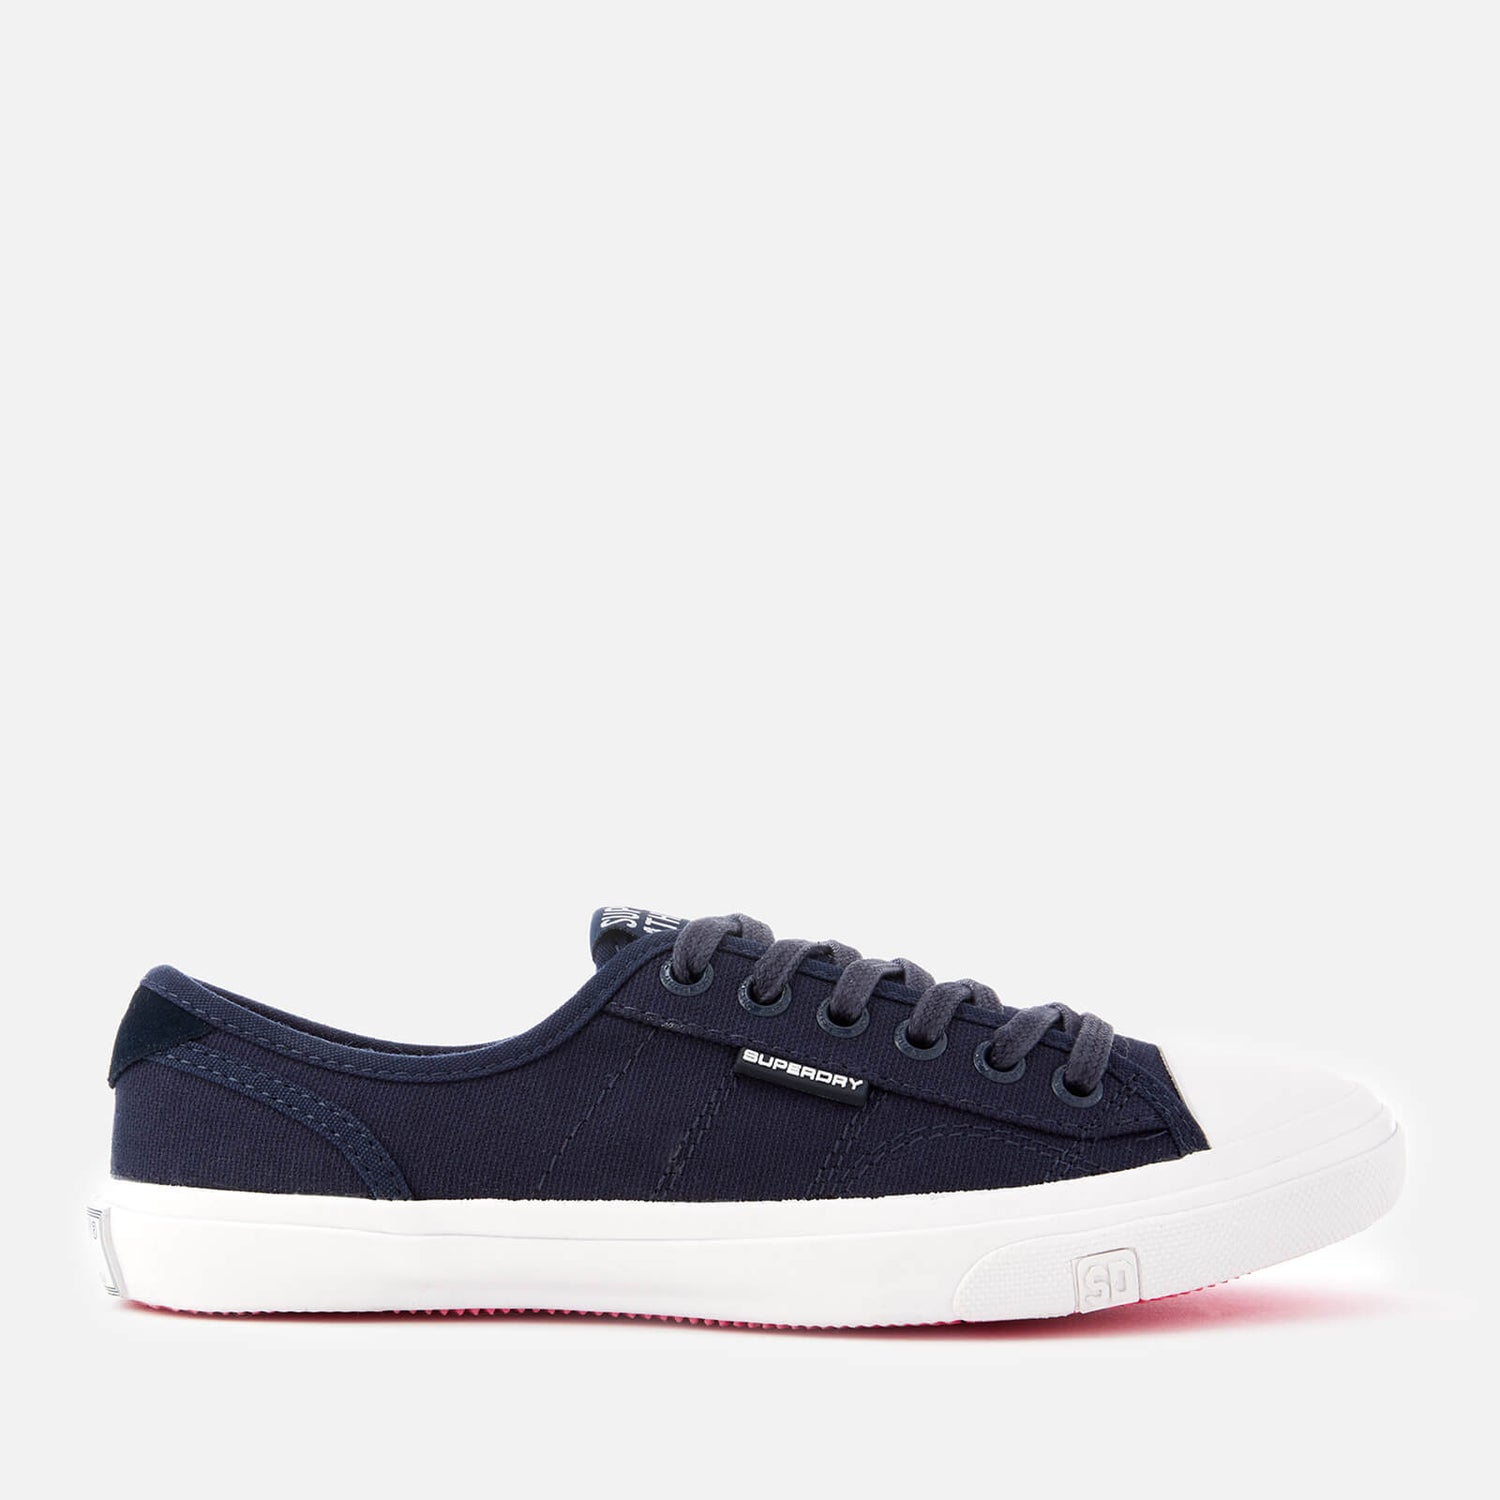 Superdry Women's Low Pro Trainers - Navy | FREE UK Delivery | Allsole